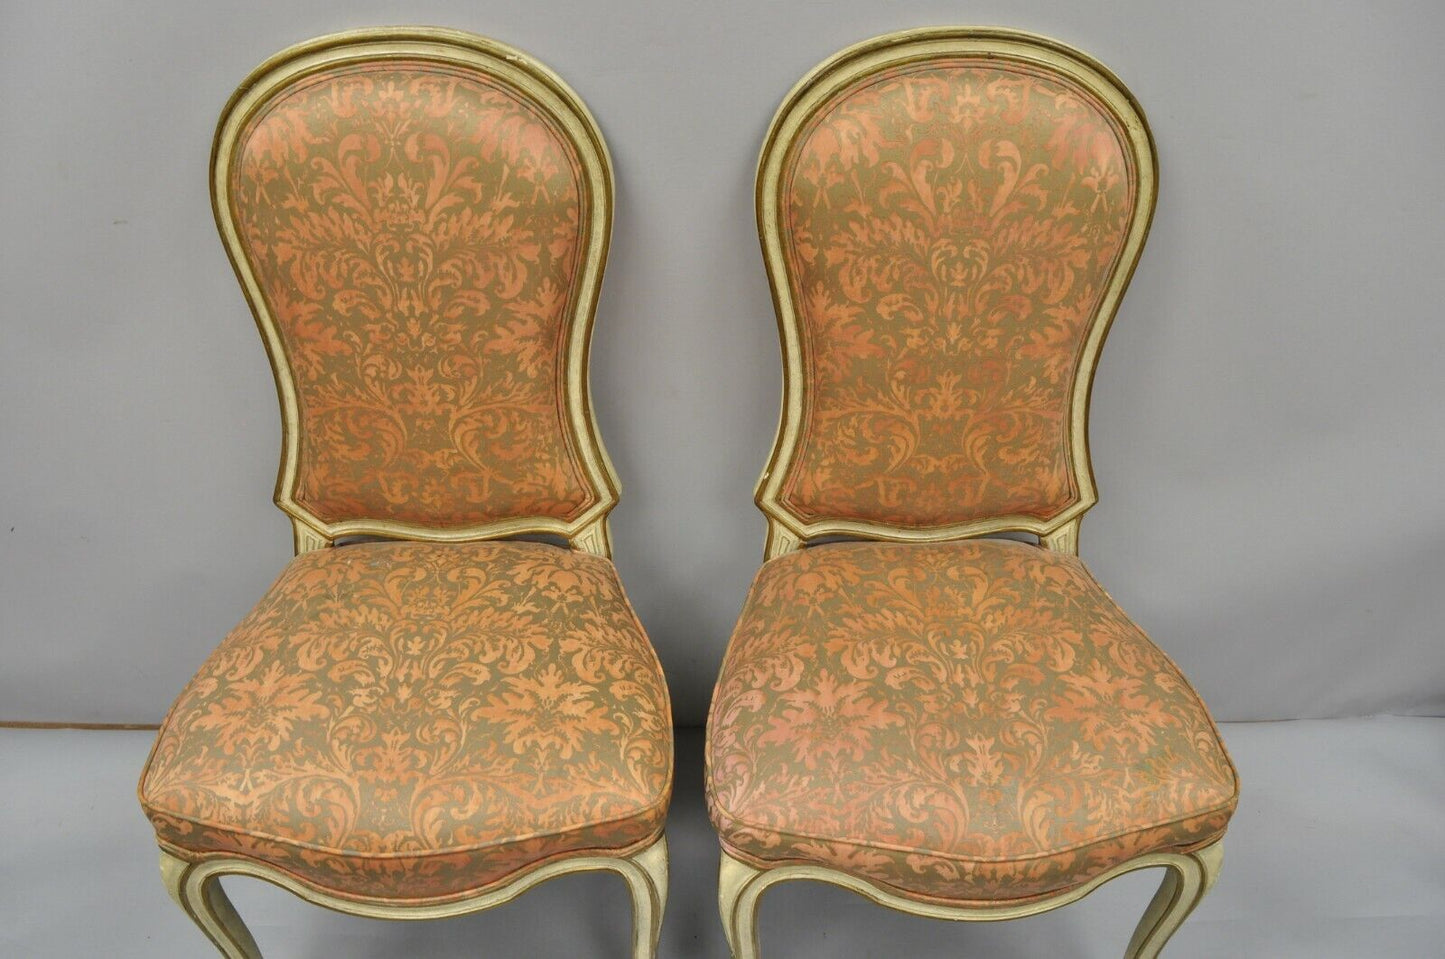 4 Italian Provincial French Hollywood Regency Upholstered Dining Side Chairs